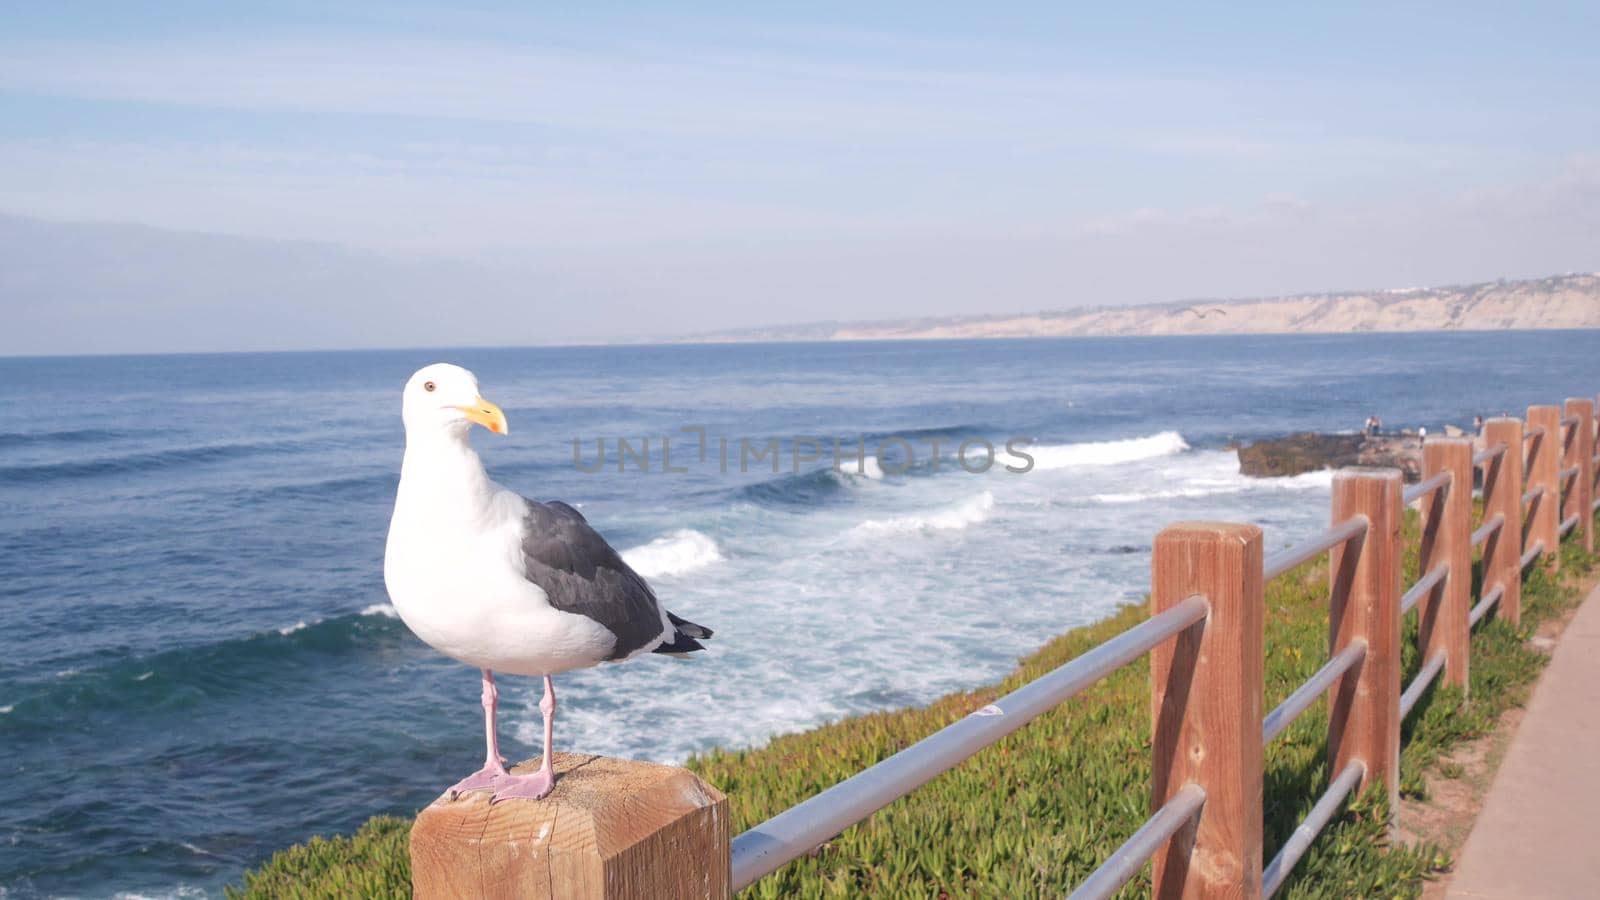 Ocean waves crashing on beach, sea water surface from above, cliff or bluff, La Jolla shore waterfront promenade, California USA. Succulent green ice plant, pacific coast. Seagull bird on railings.